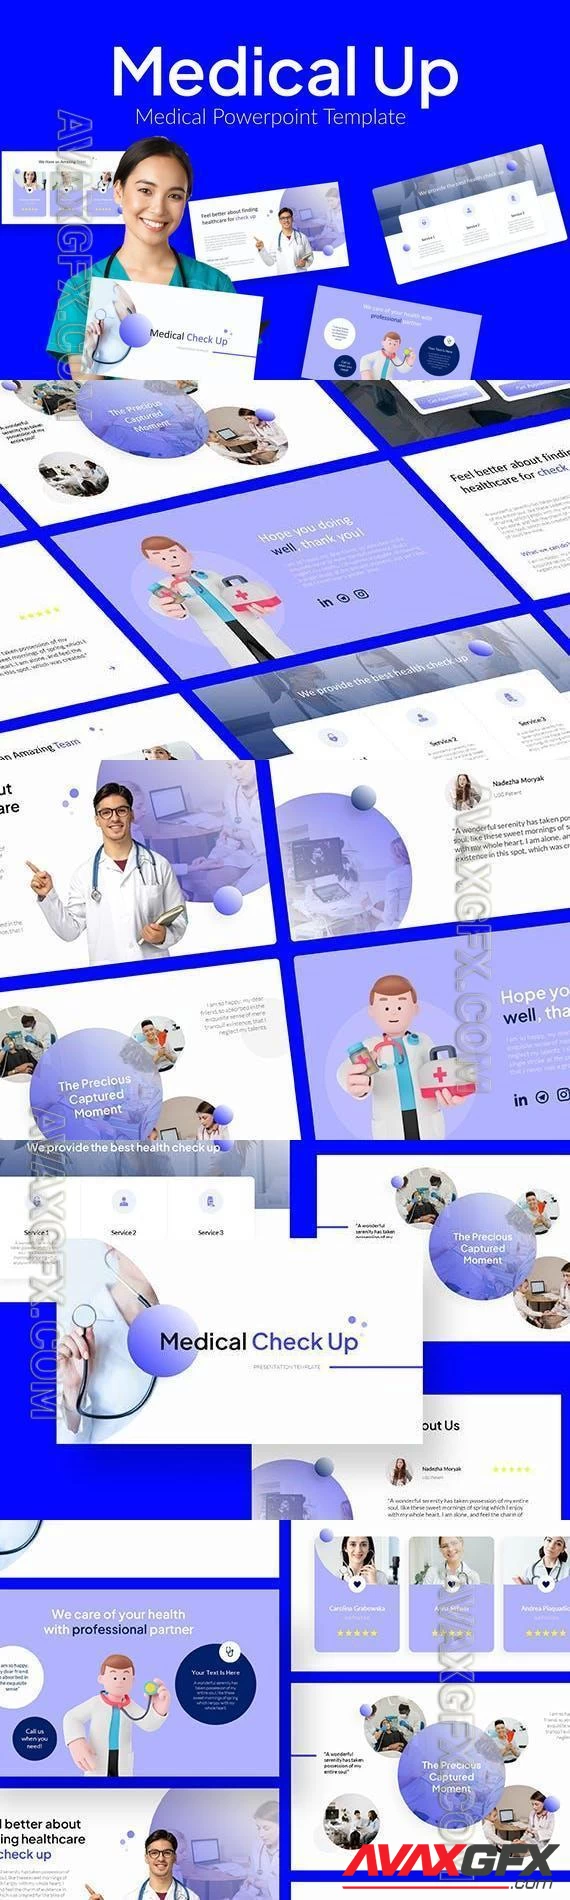 Medical Check Up Powerpoint Template